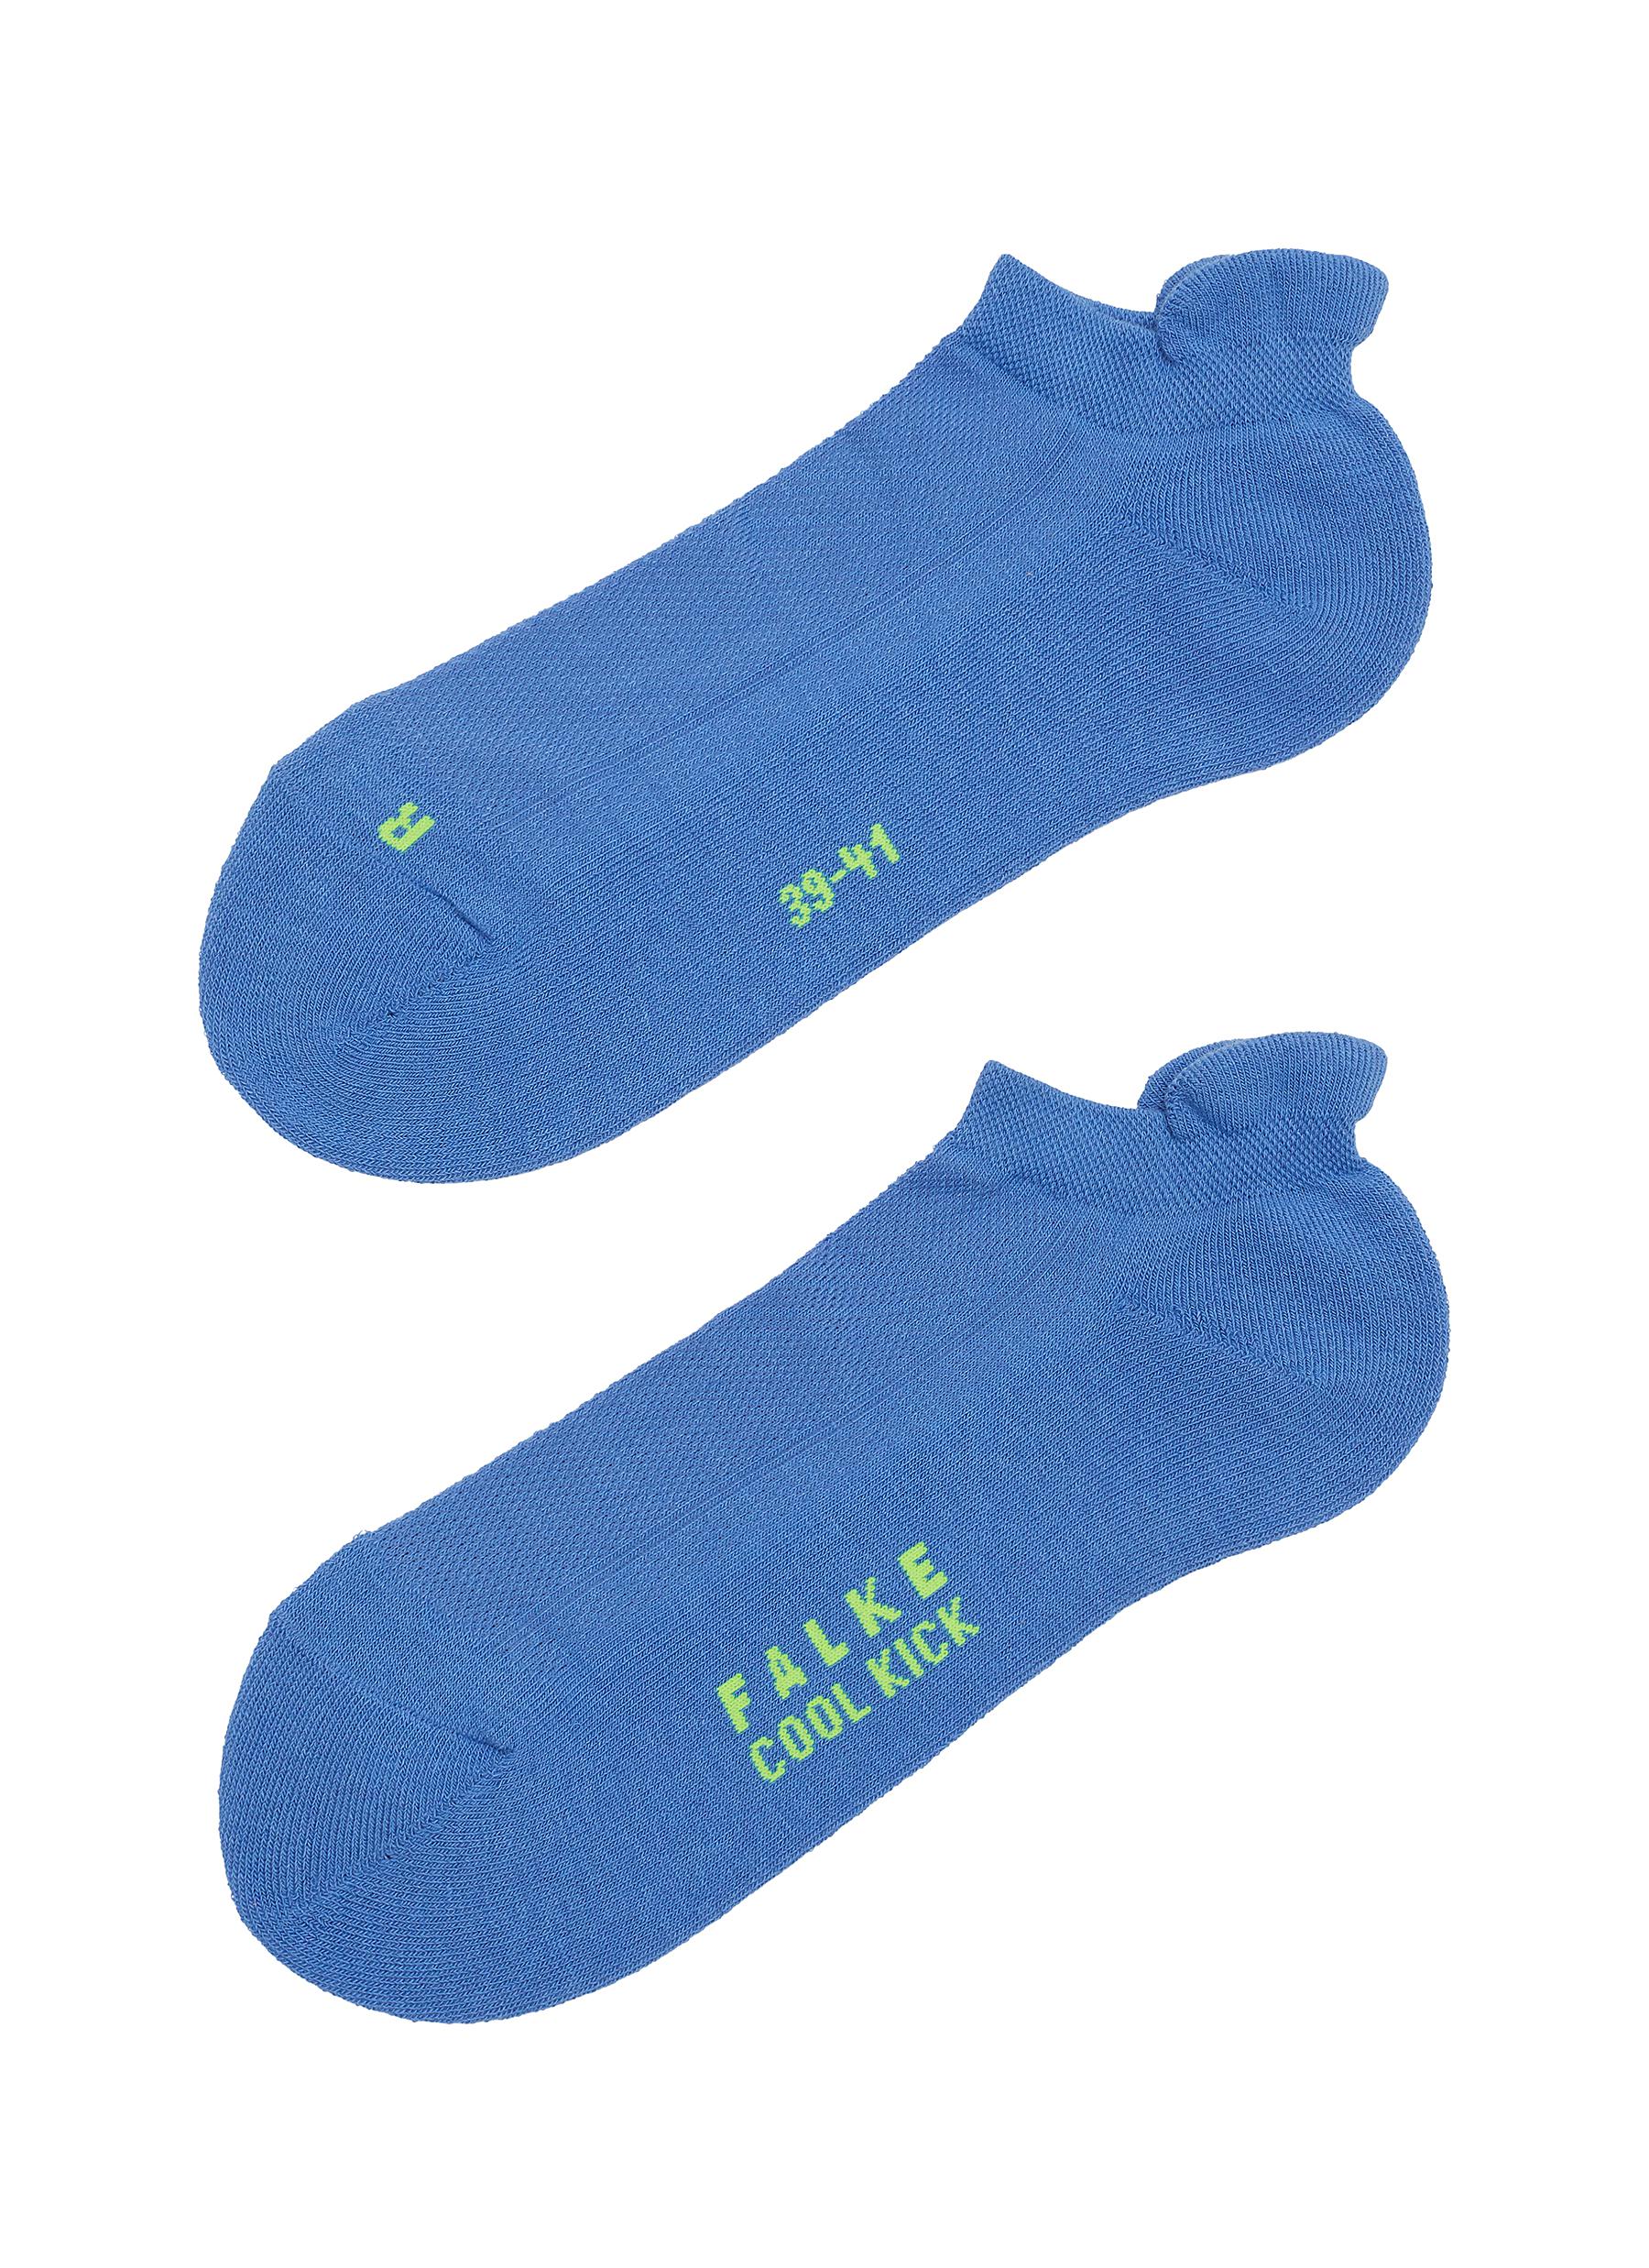 ‘COOL KICK INVISIBLE' SNEAKER ANKLE SOCKS